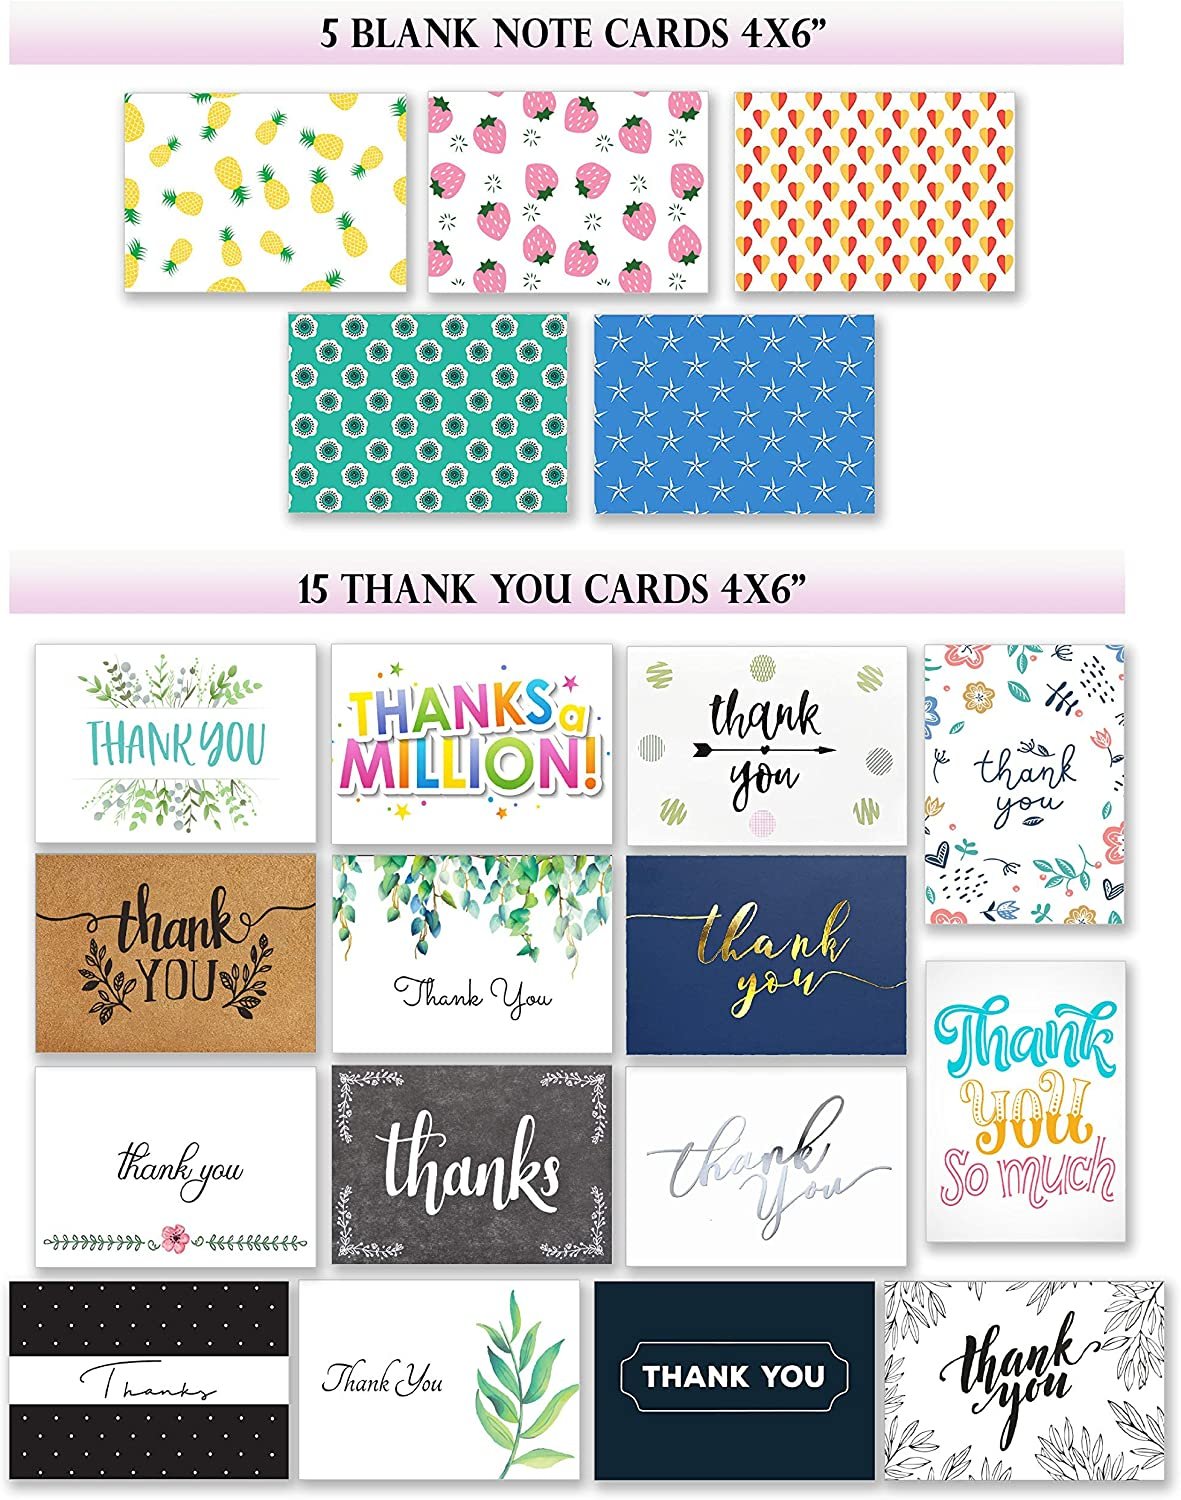 100 All Occasion Cards Assortment Box with Envelopes and Stickers